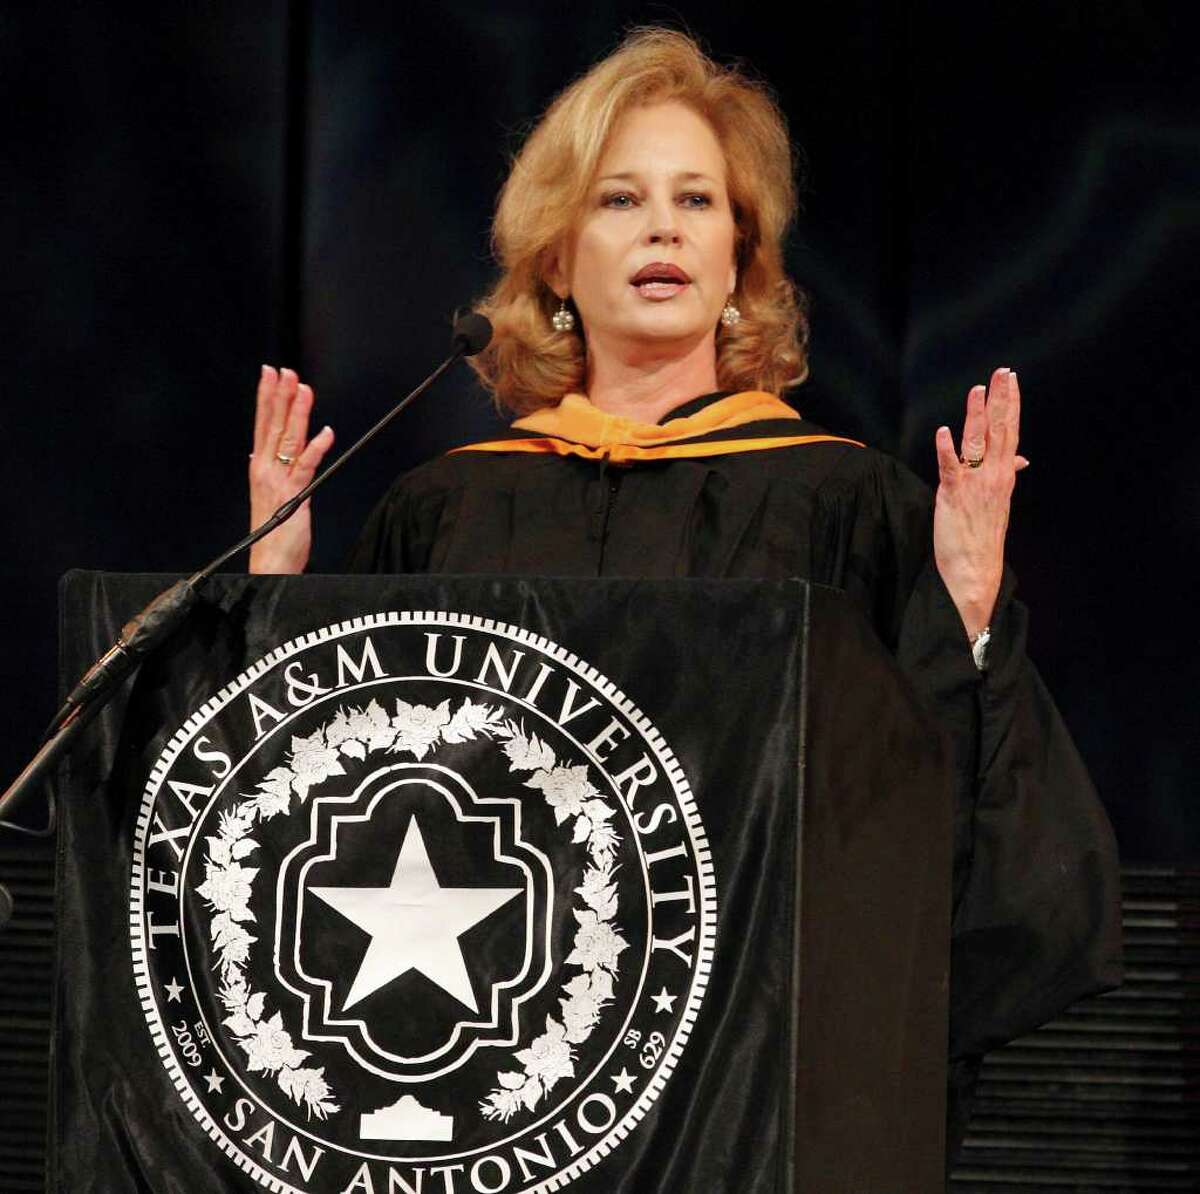 First Lady of Texas Anita Perry delivers the commencement address during the Texas A&M University-San Antonio spring commencement ceremony held Sunday May 22, 2011 at Community Bible Church. (PHOTO BY EDWARD A. ORNELAS/eaornelas@express-news.net)